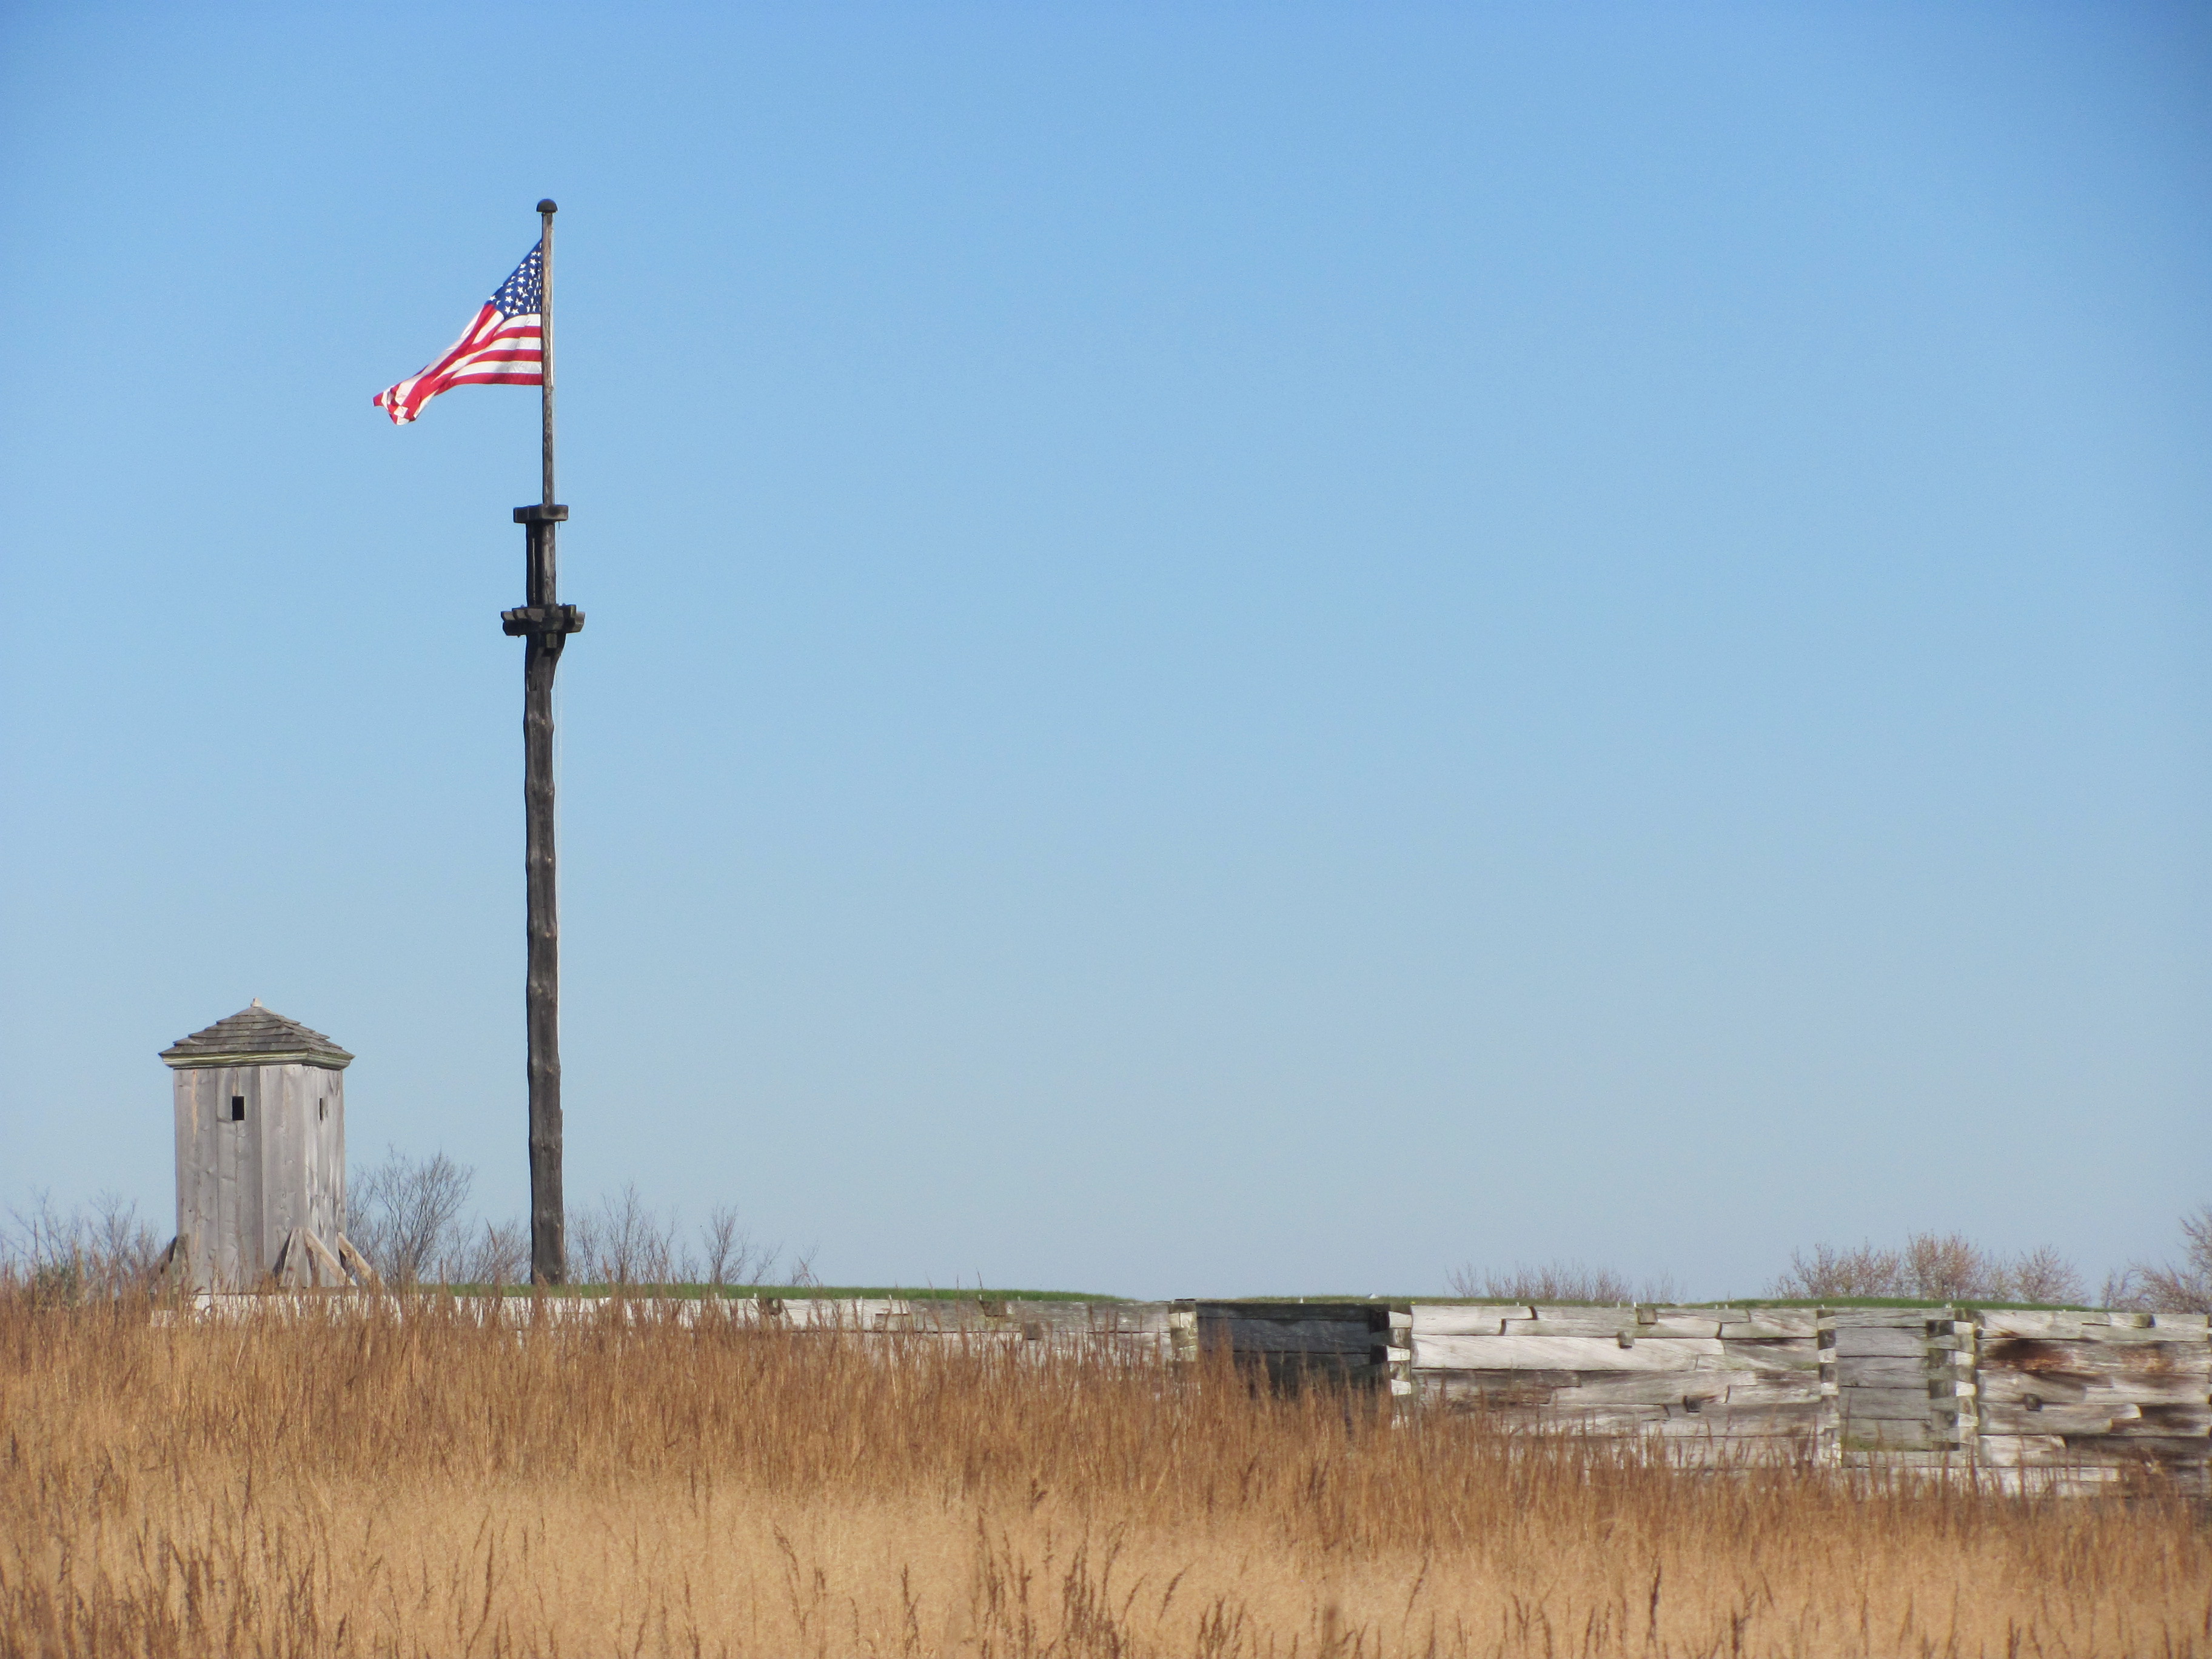 Tall grass surrounds the outside fort wall. A flag flies over it.